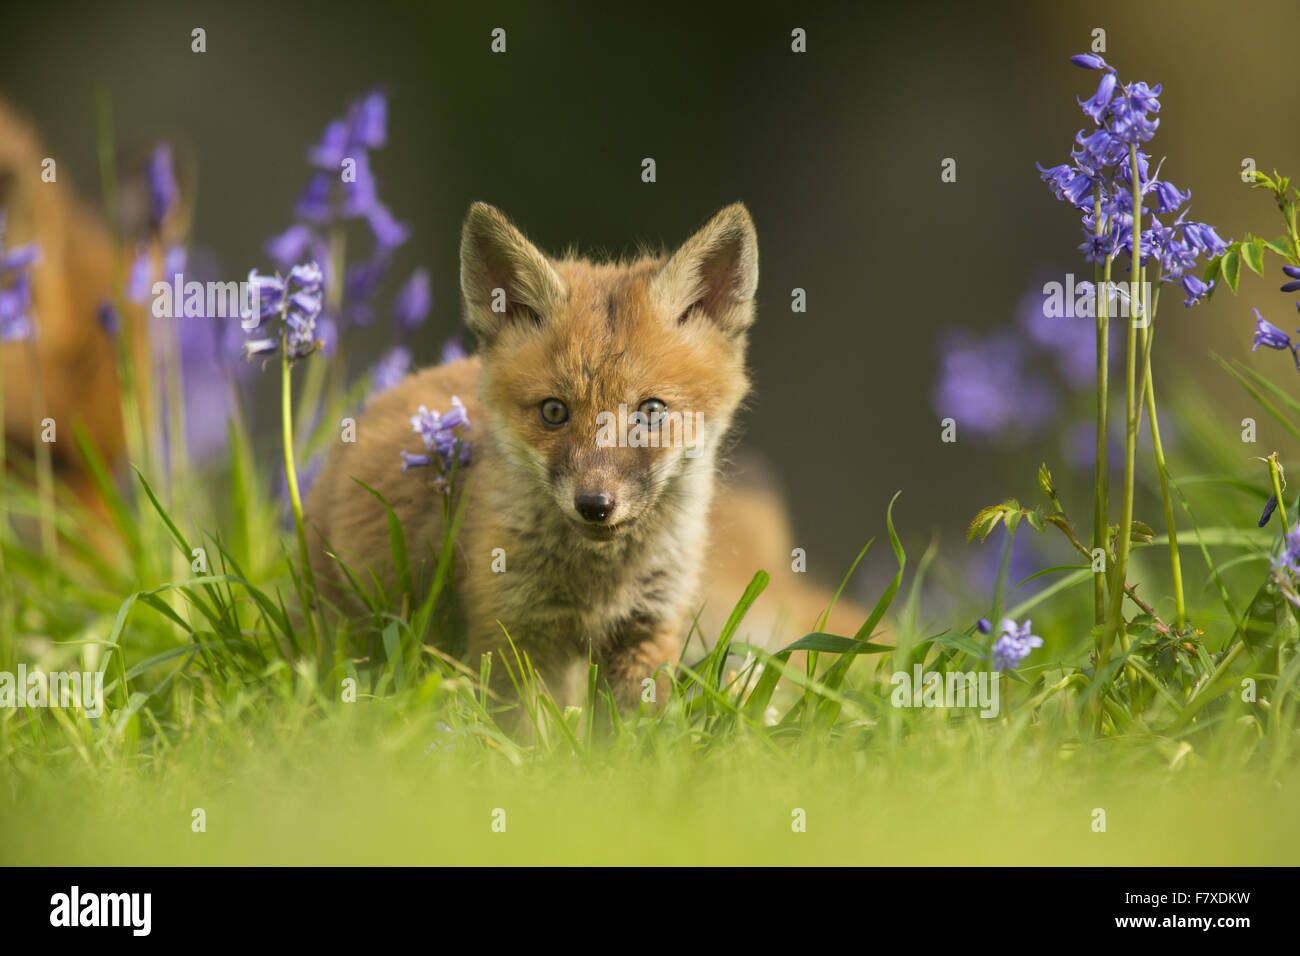 European Red Fox (Vulpes vulpes) cub, standing amongst Common Bluebell (Hyacinthoides non-scripta) flowers in city cemetery, London, England, April Stock Photo